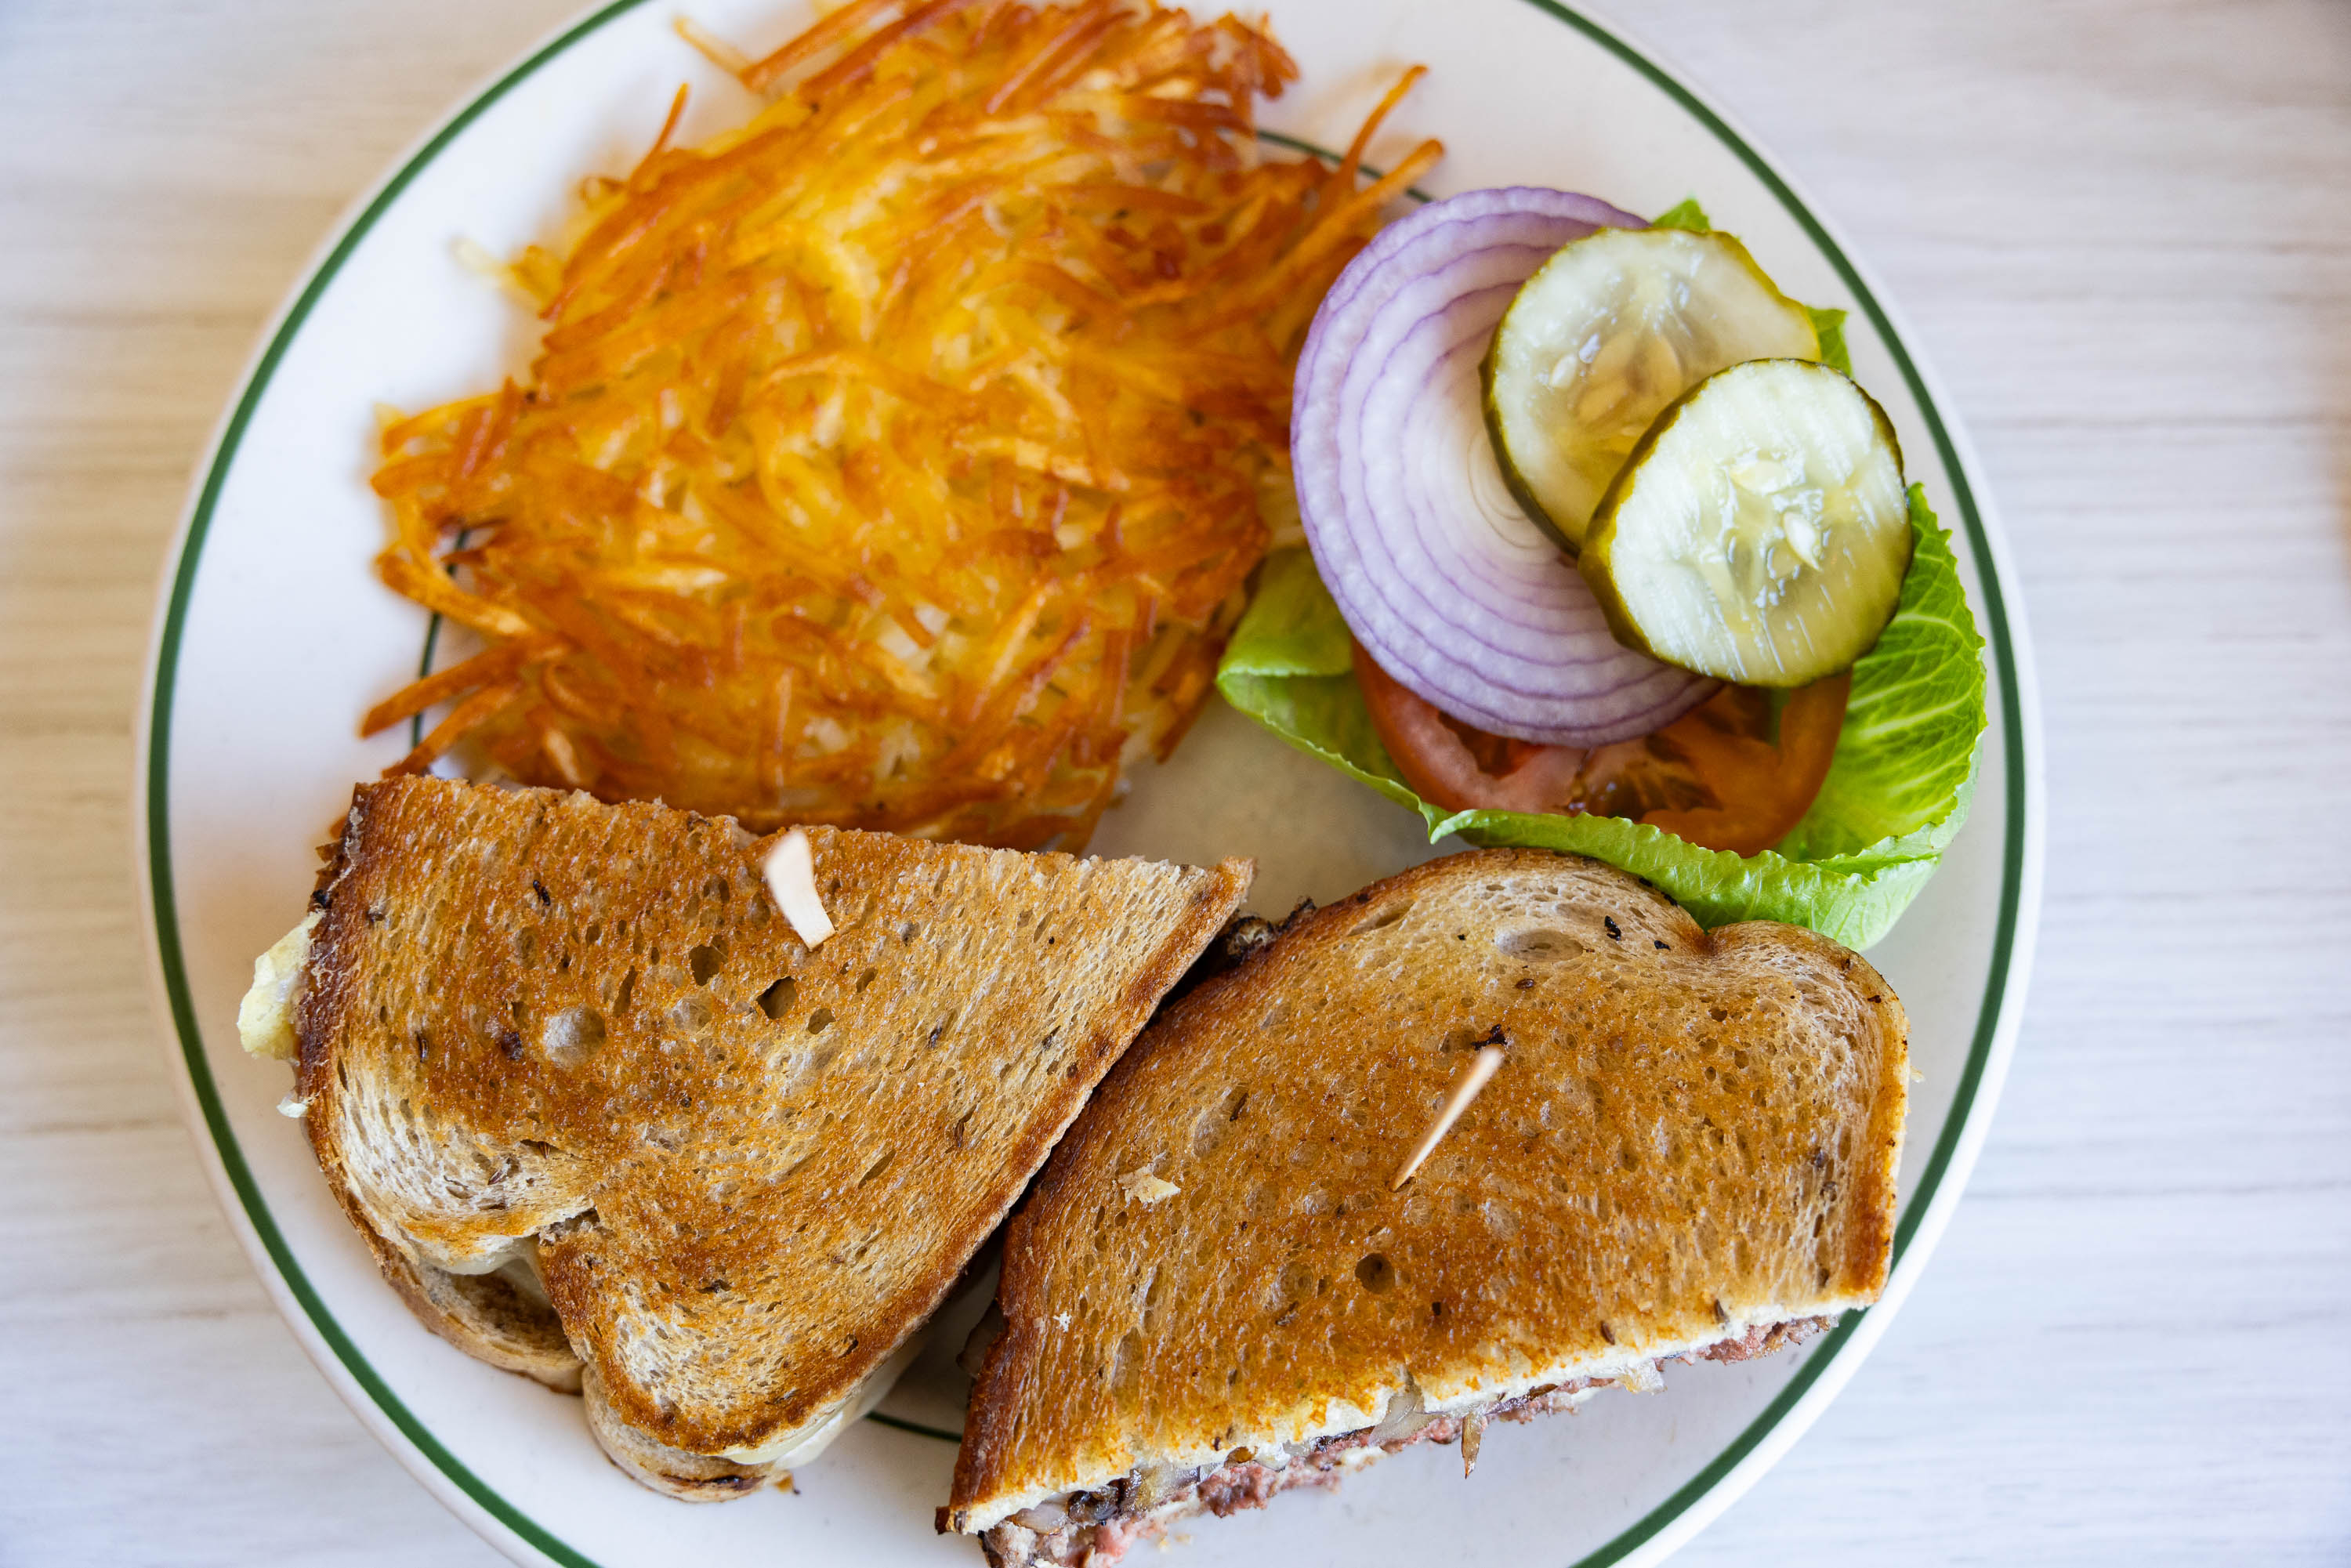 A patty melt sandwich cut in half with hash browns and a fresh side salad on a white plate.